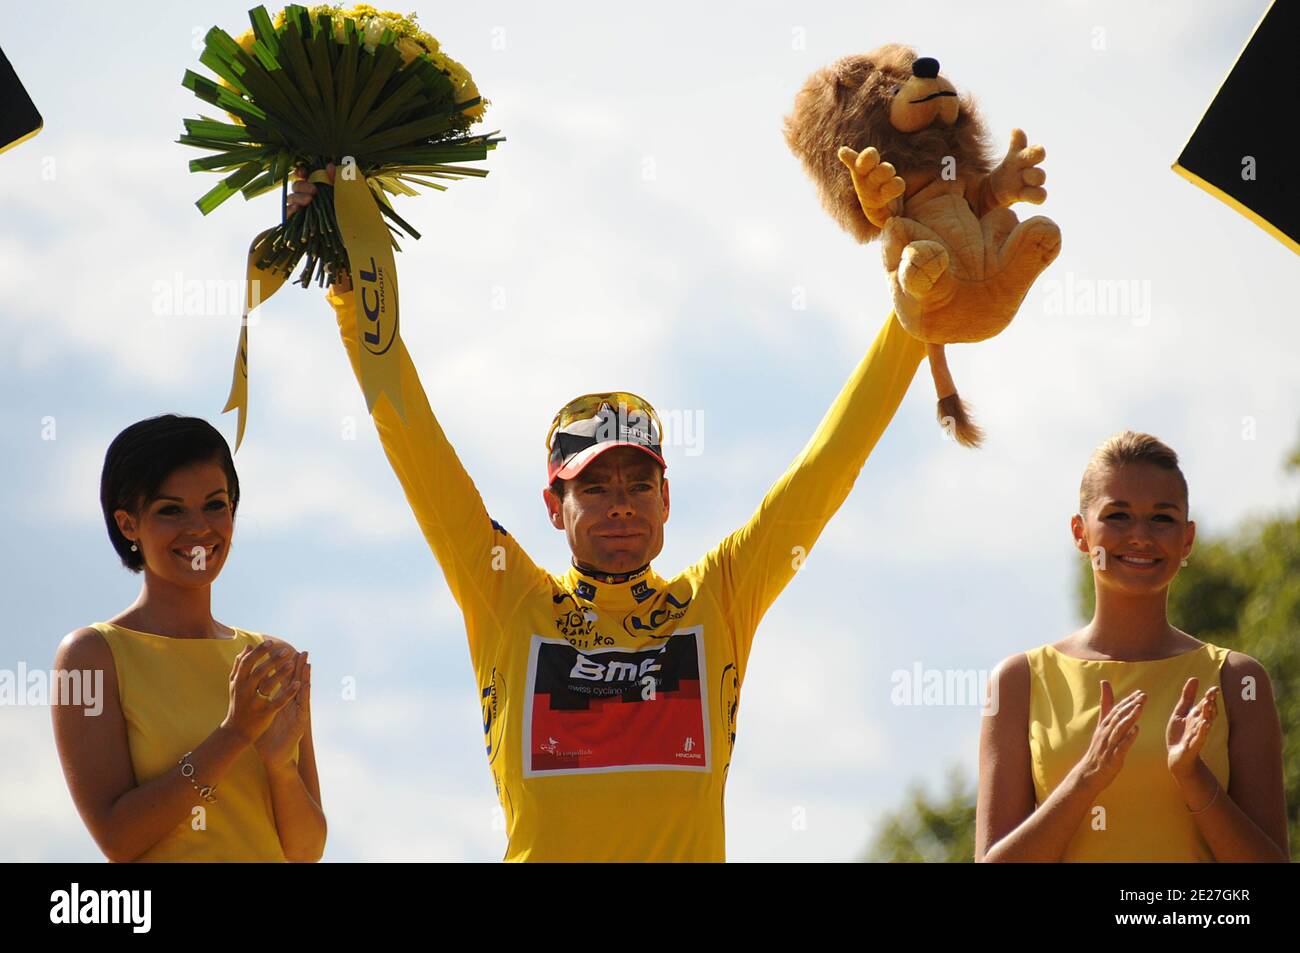 Cadel Evans of team BMC celebrates on the podium after winning the 2011 Tour de France celebrates on the podium after the 21st and final stage of the 98th Le Tour de France cycling race between Creteil and Paris, on the Champs Elysees, in Paris, France on July 24, 2011. Photo by Giancarlo Gorassini/ABACAPRESS.COM Stock Photo